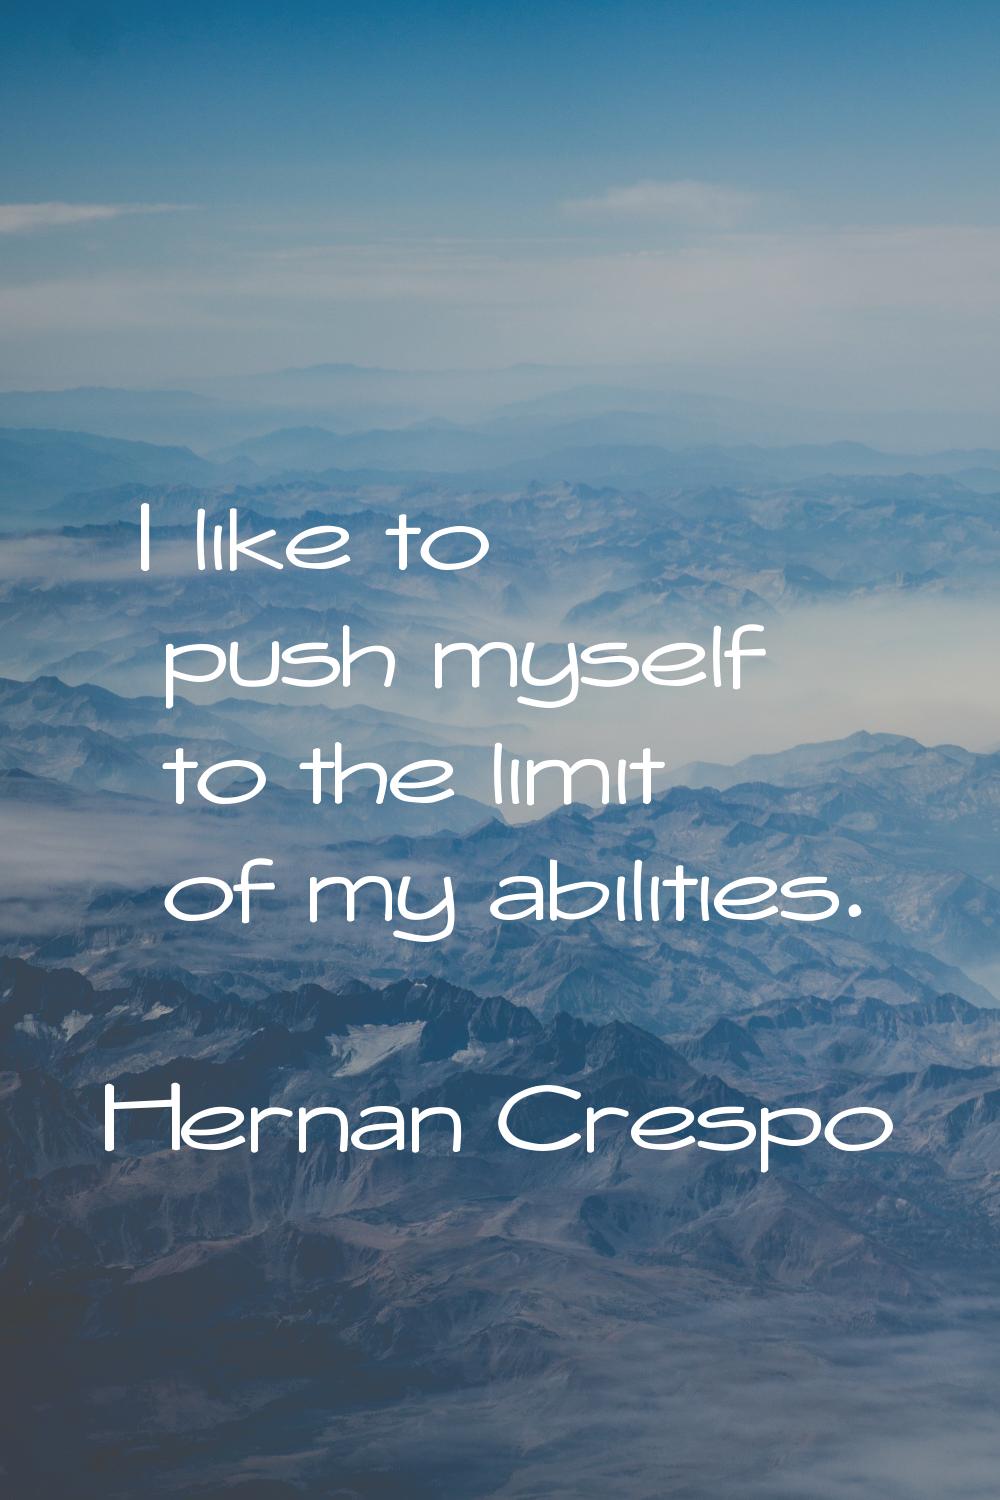 I like to push myself to the limit of my abilities.